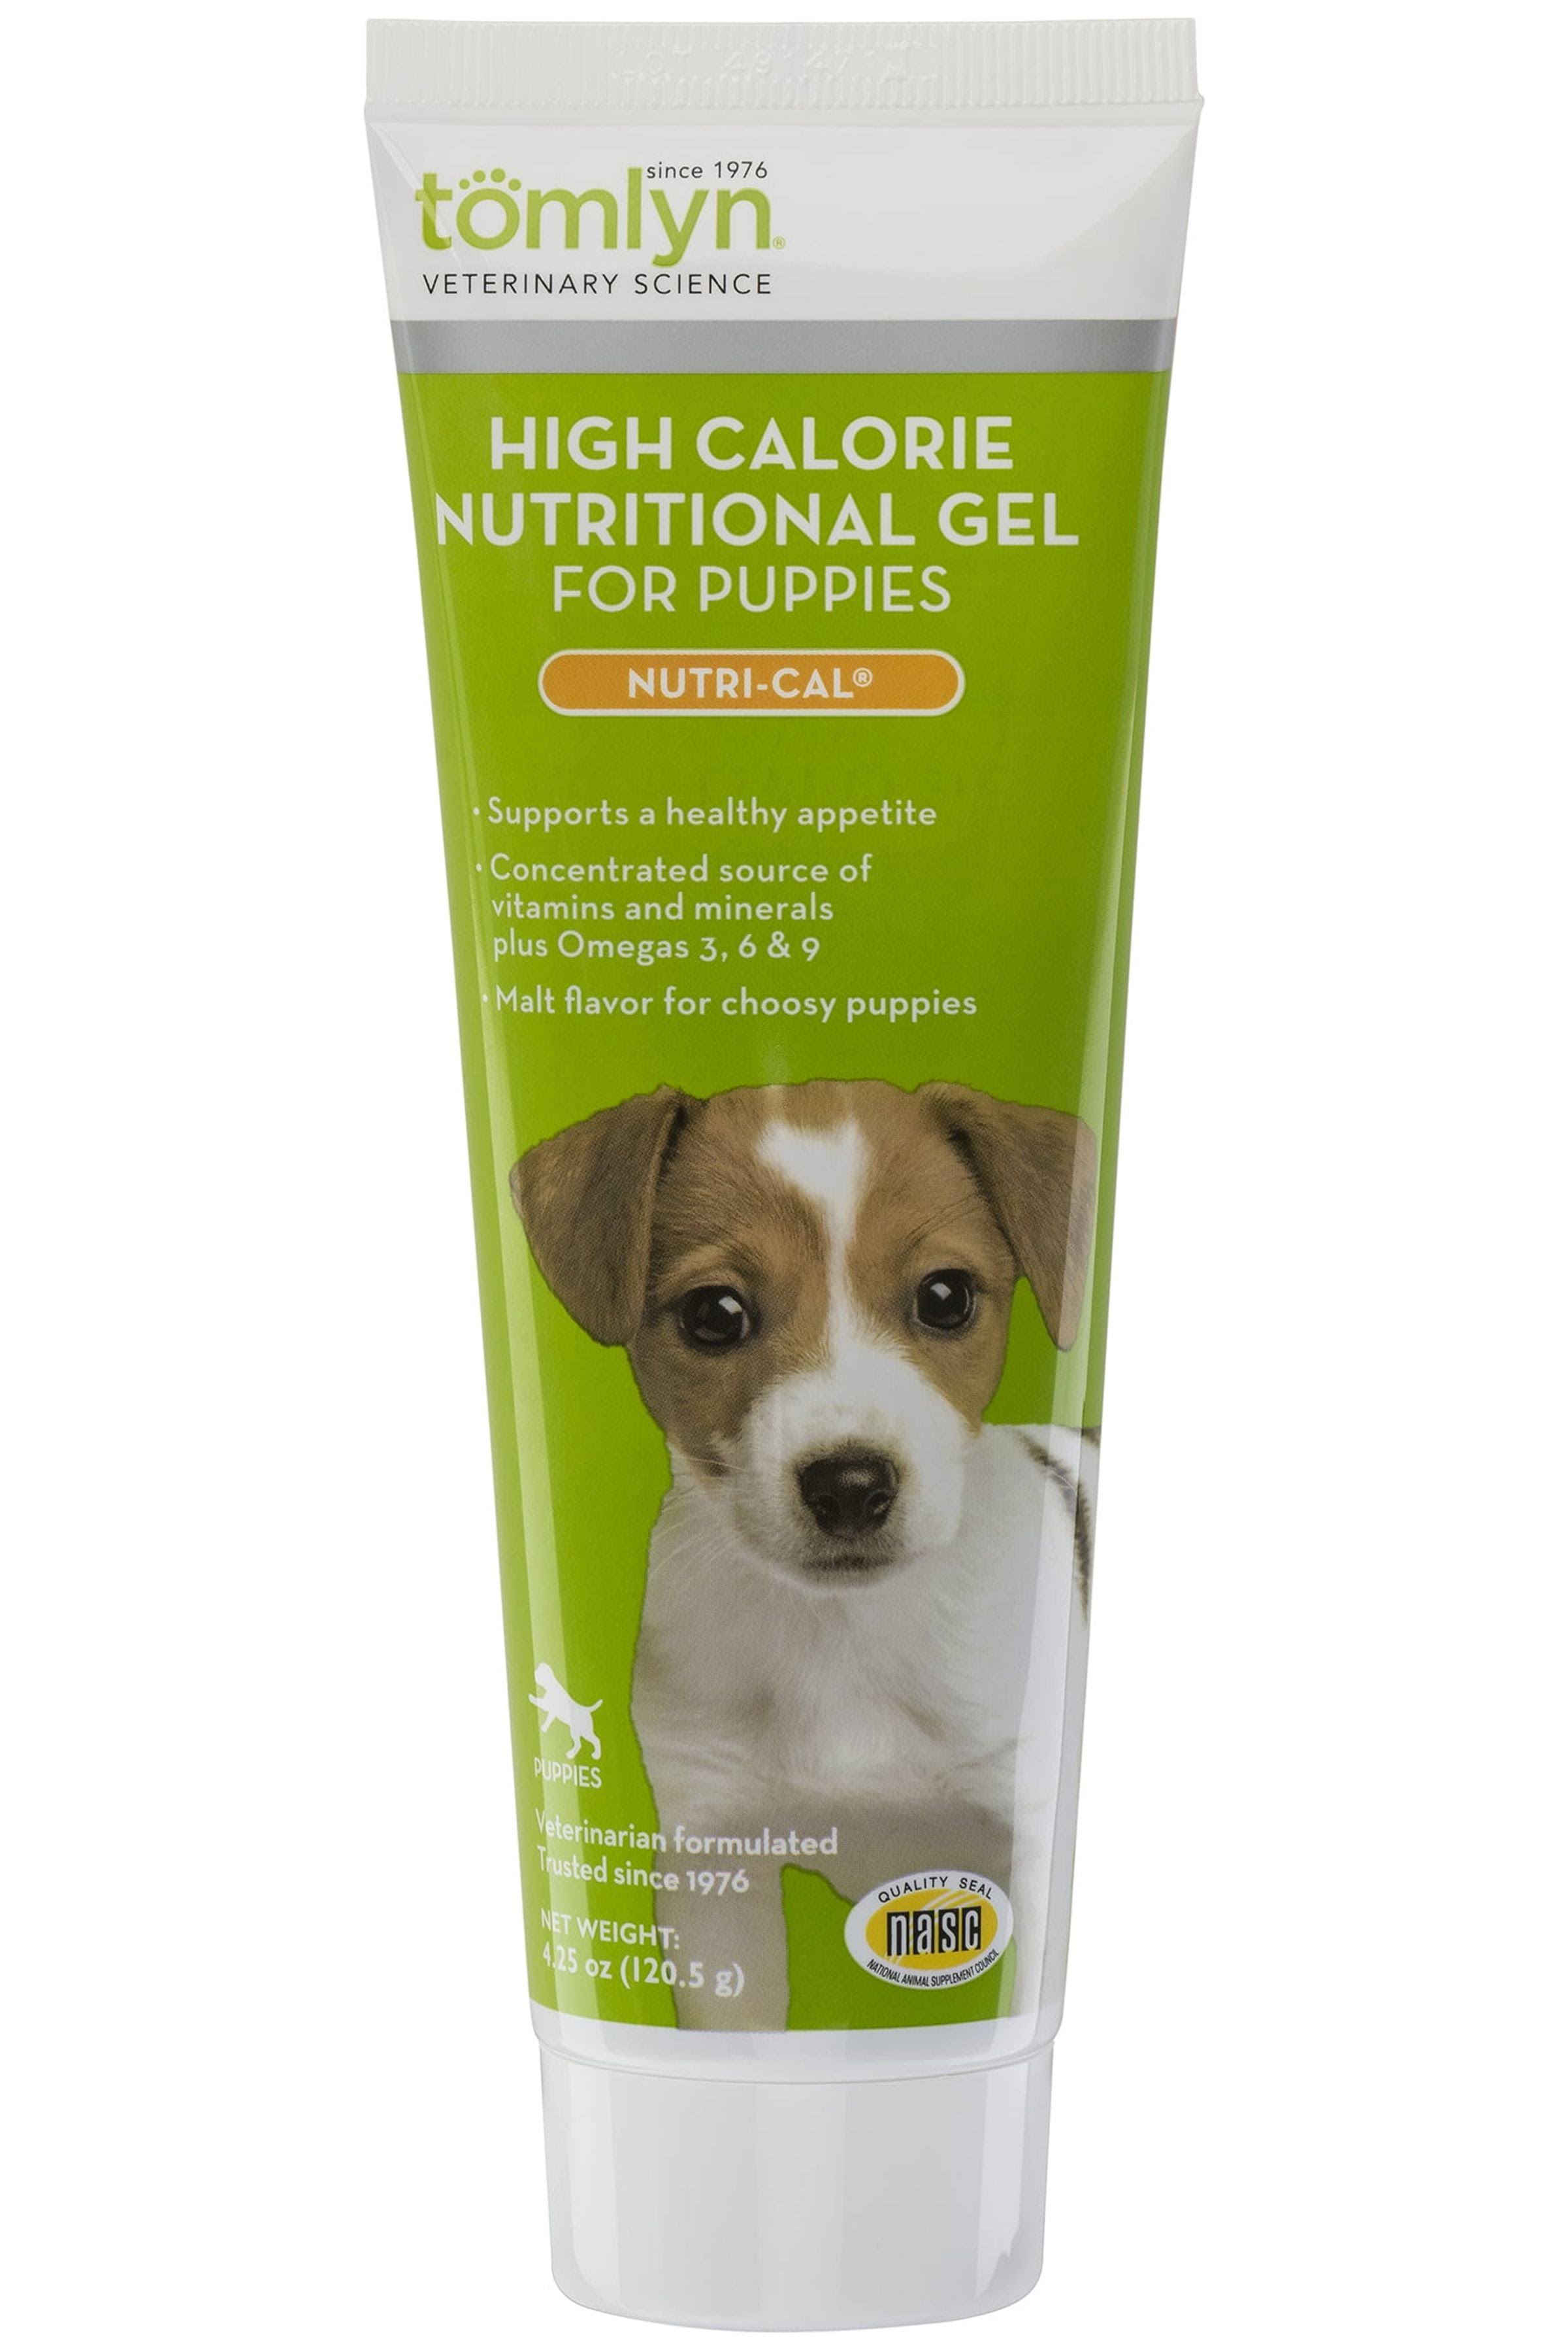 Tomlyn High Calorie Nutritional Supplement for Puppies